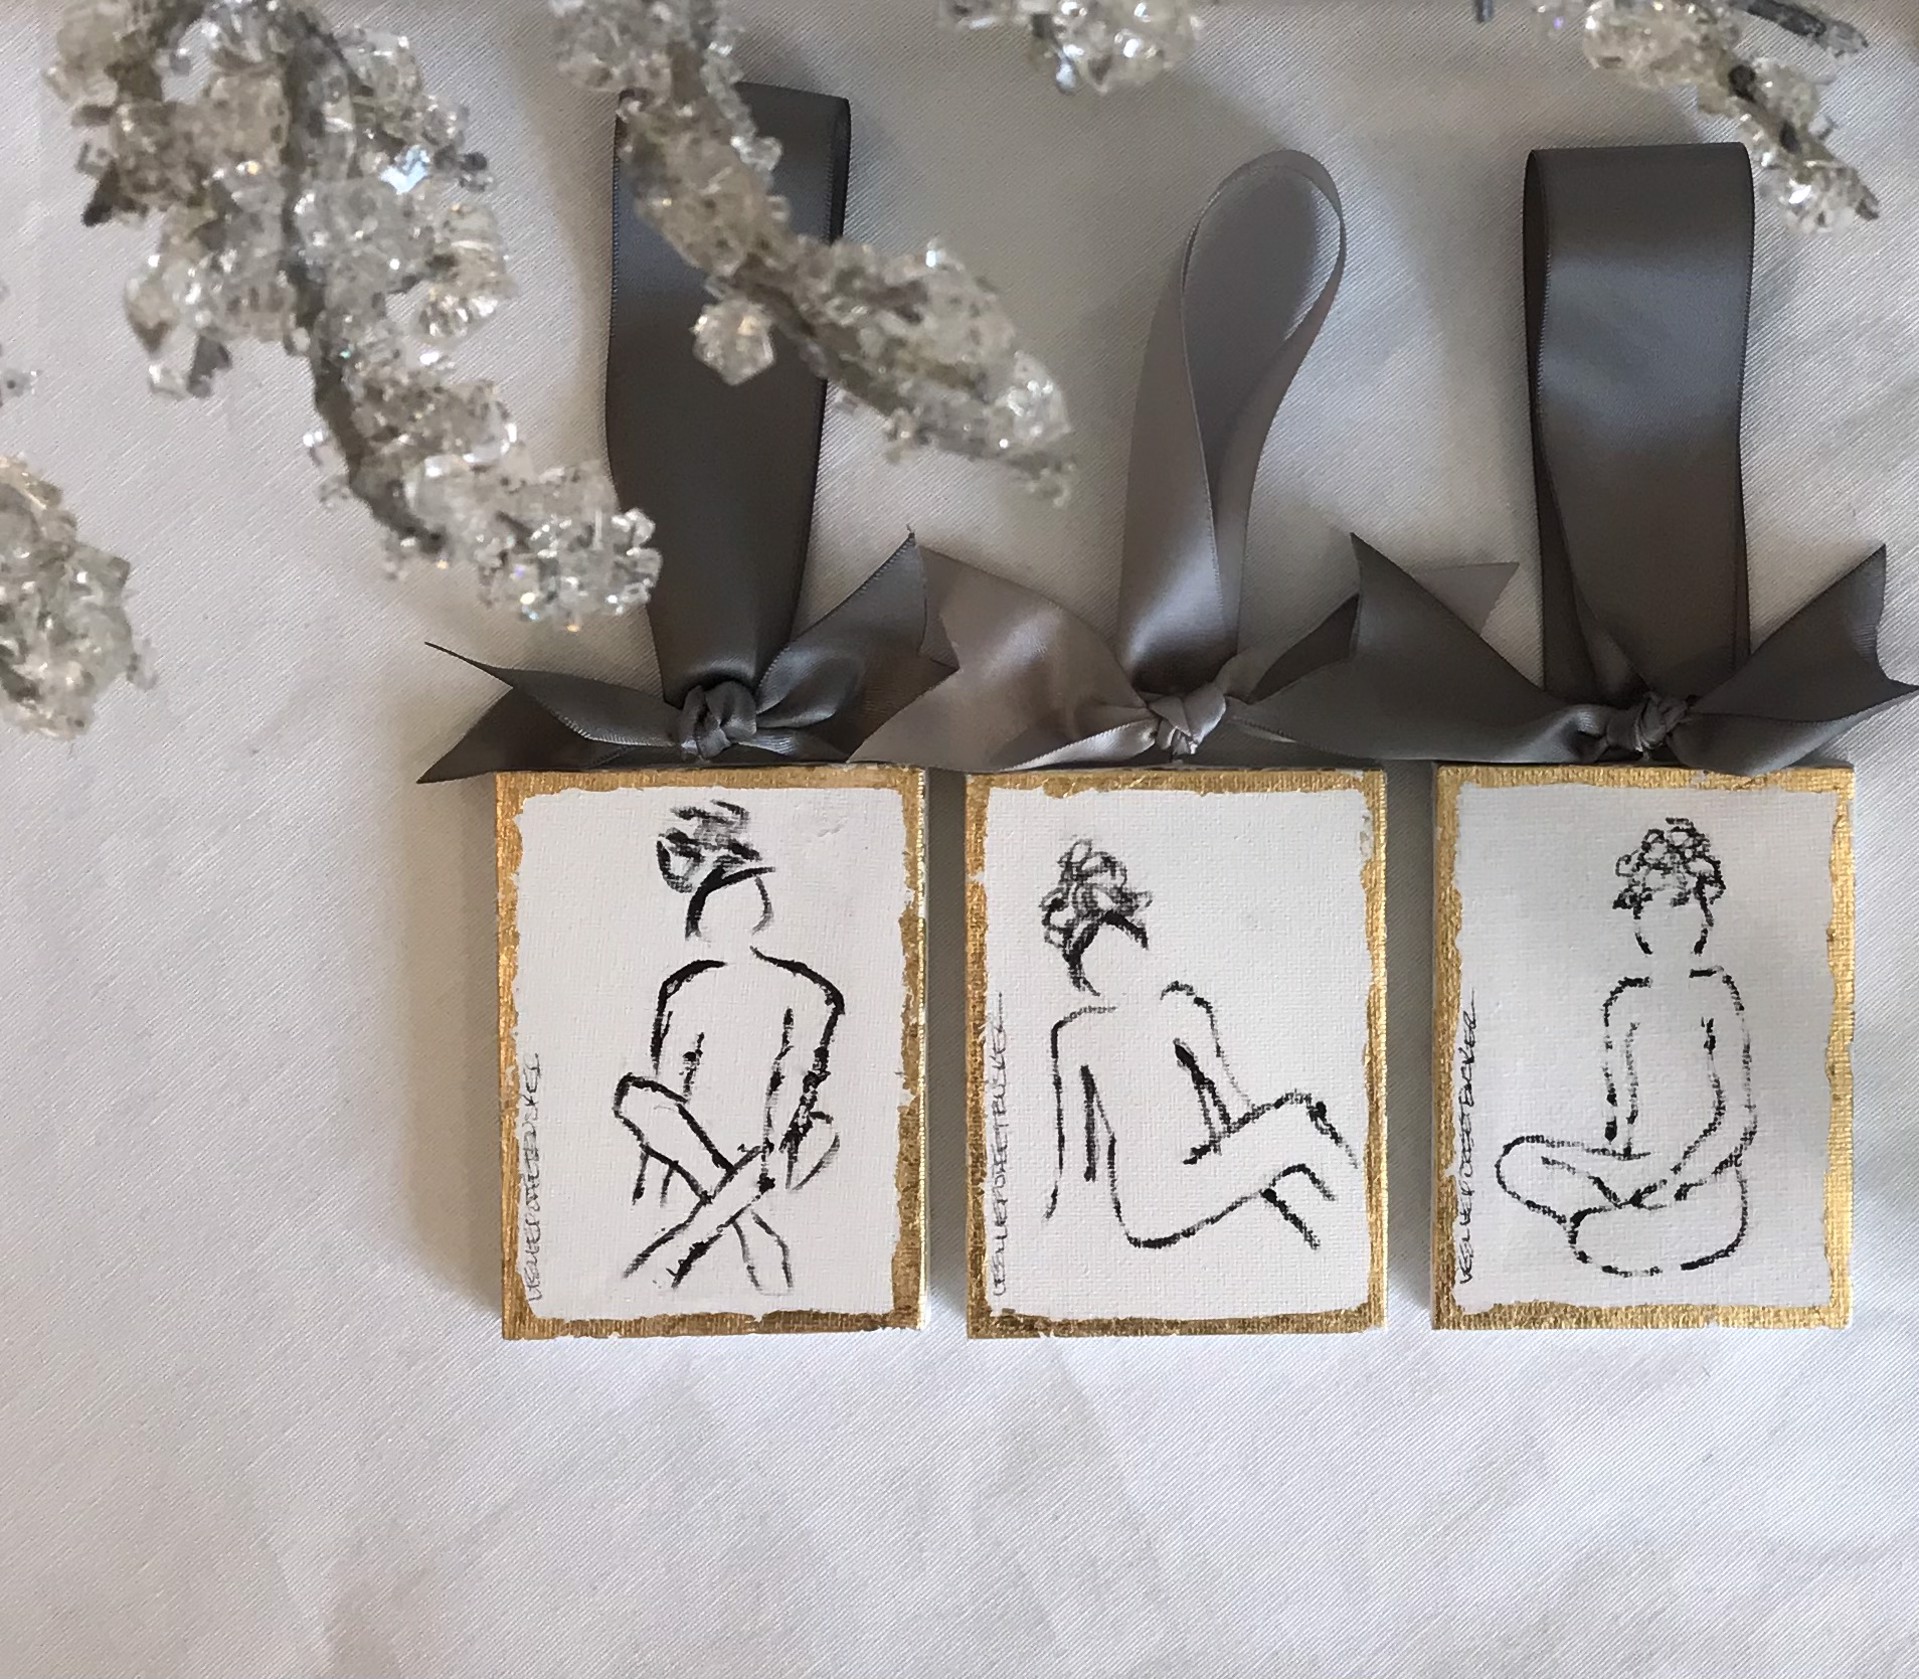 2021 Holiday Figure Ornaments, Set of Three, Group 2 by Leslie Poteet Busker